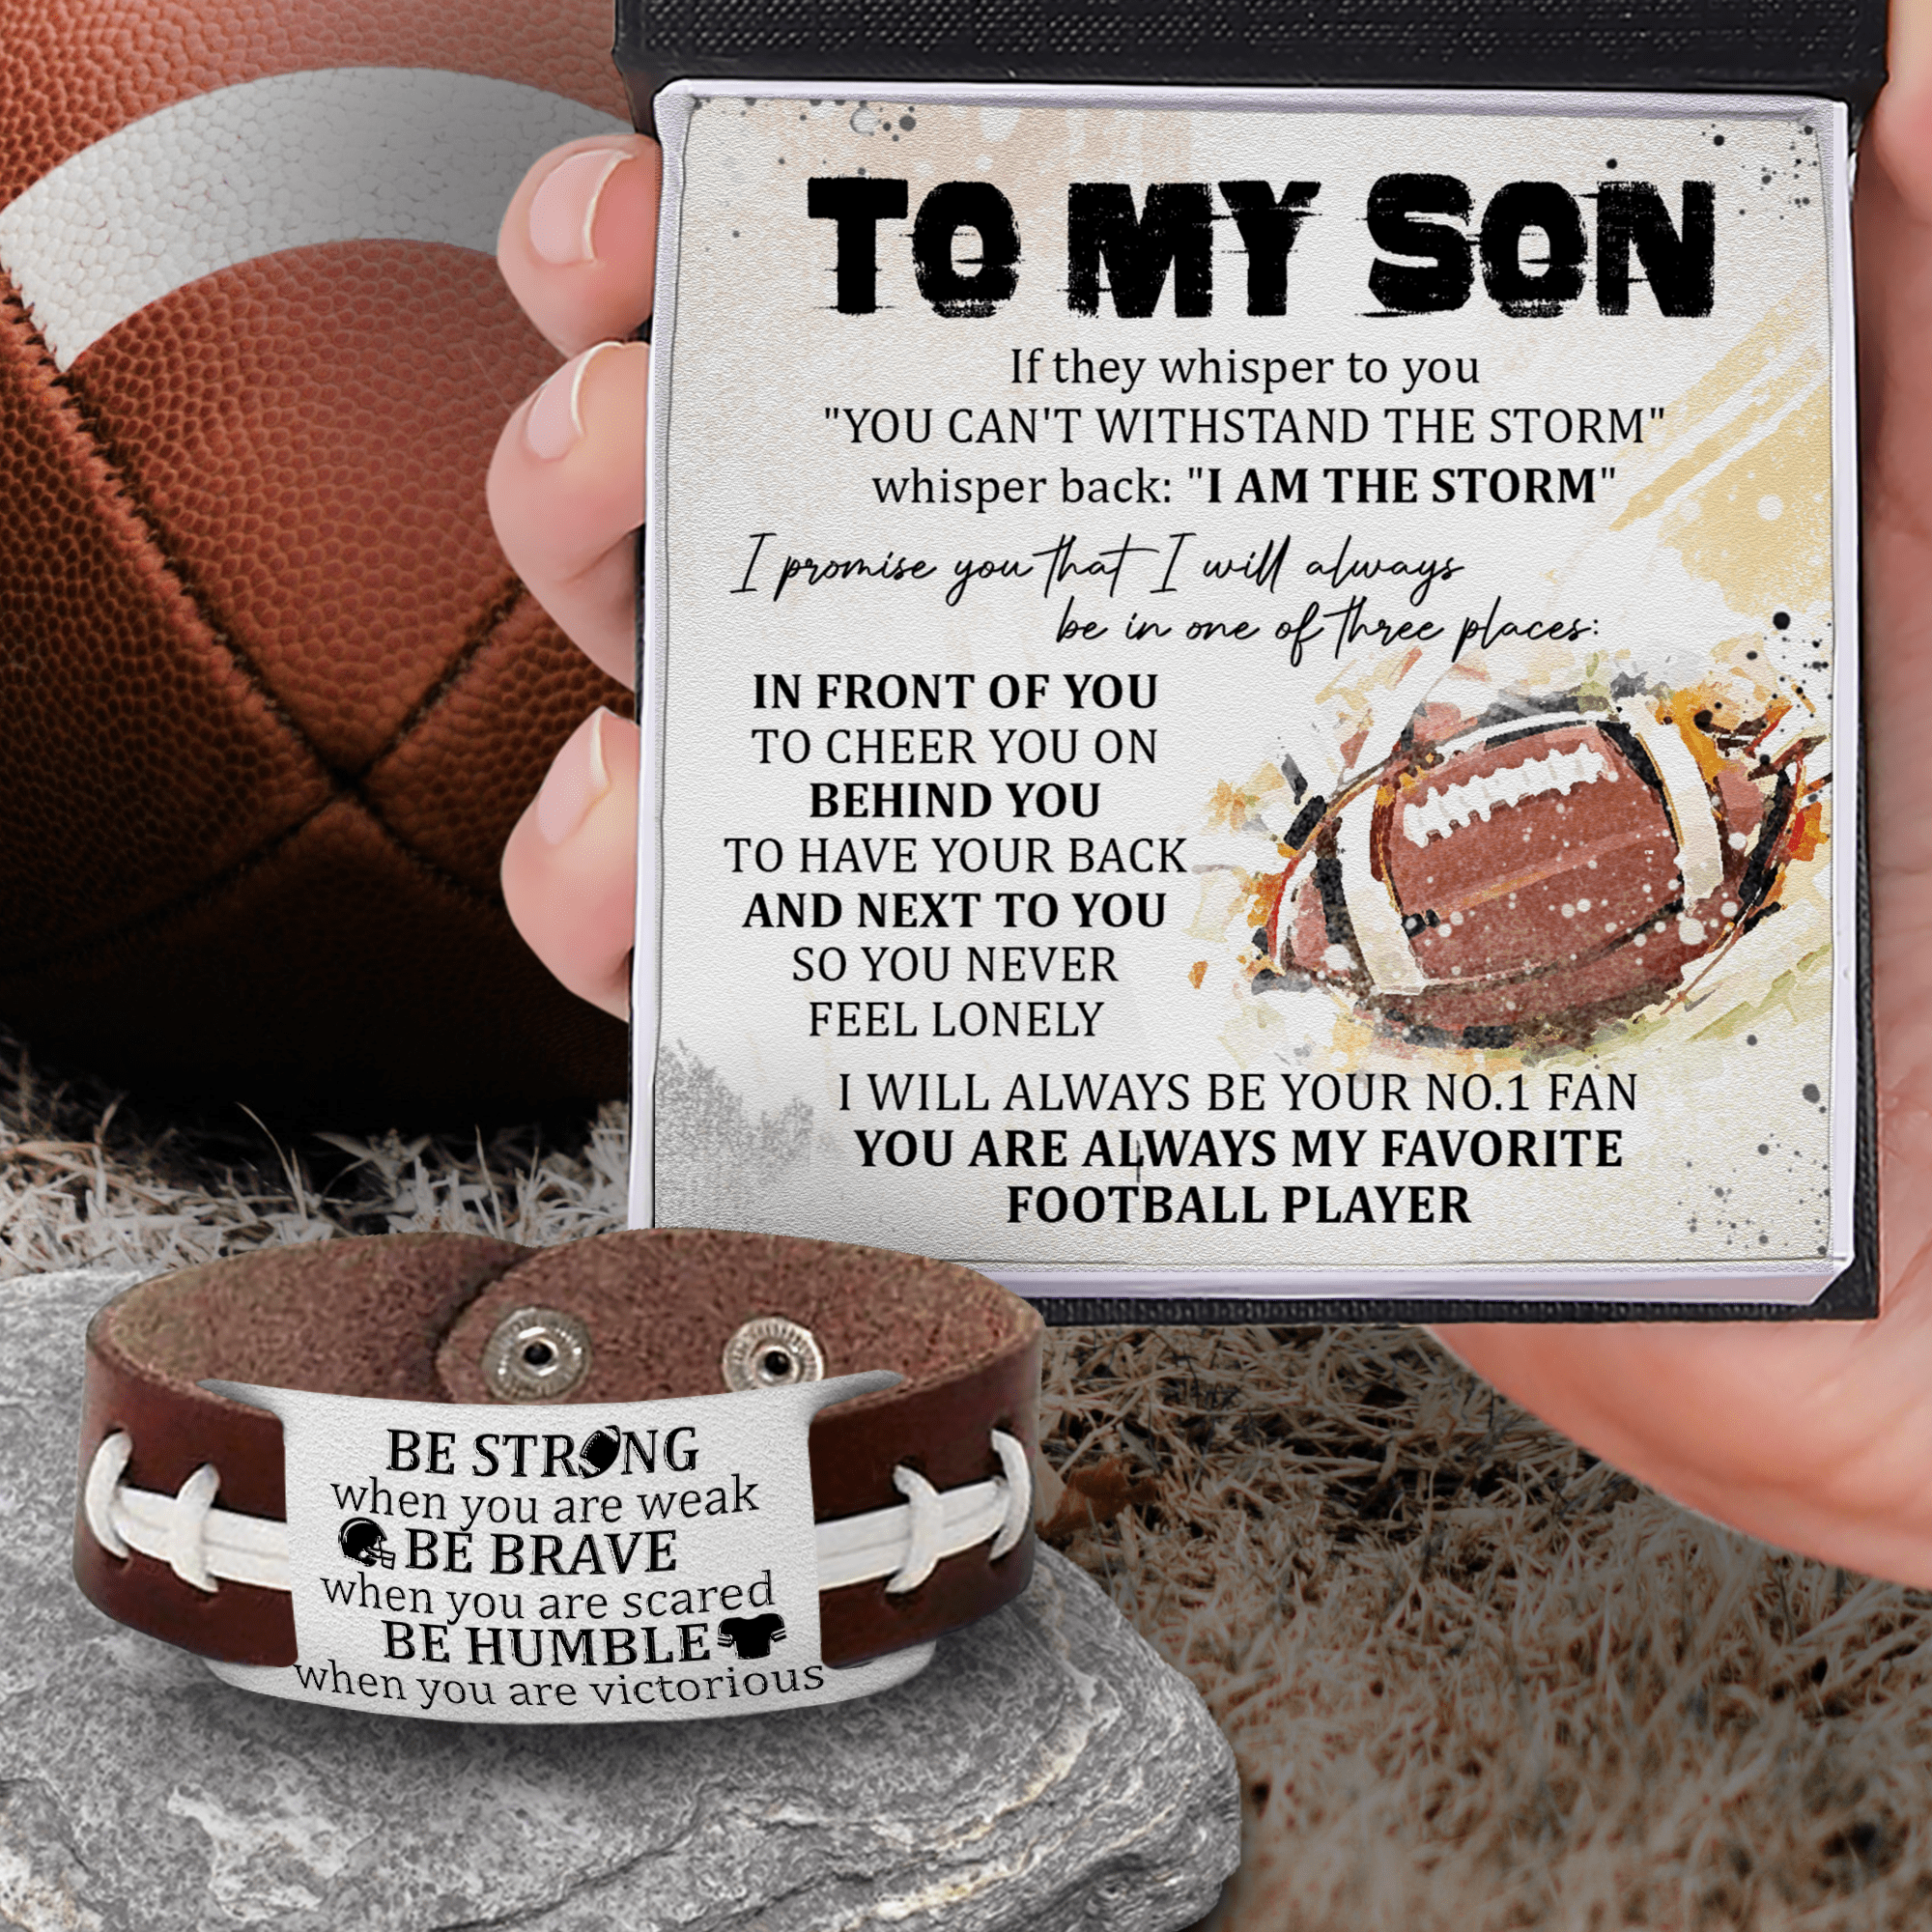 Football Bracelet - American Football - To My Son - You Are Always My Favorite Football Player - Gbzo16017